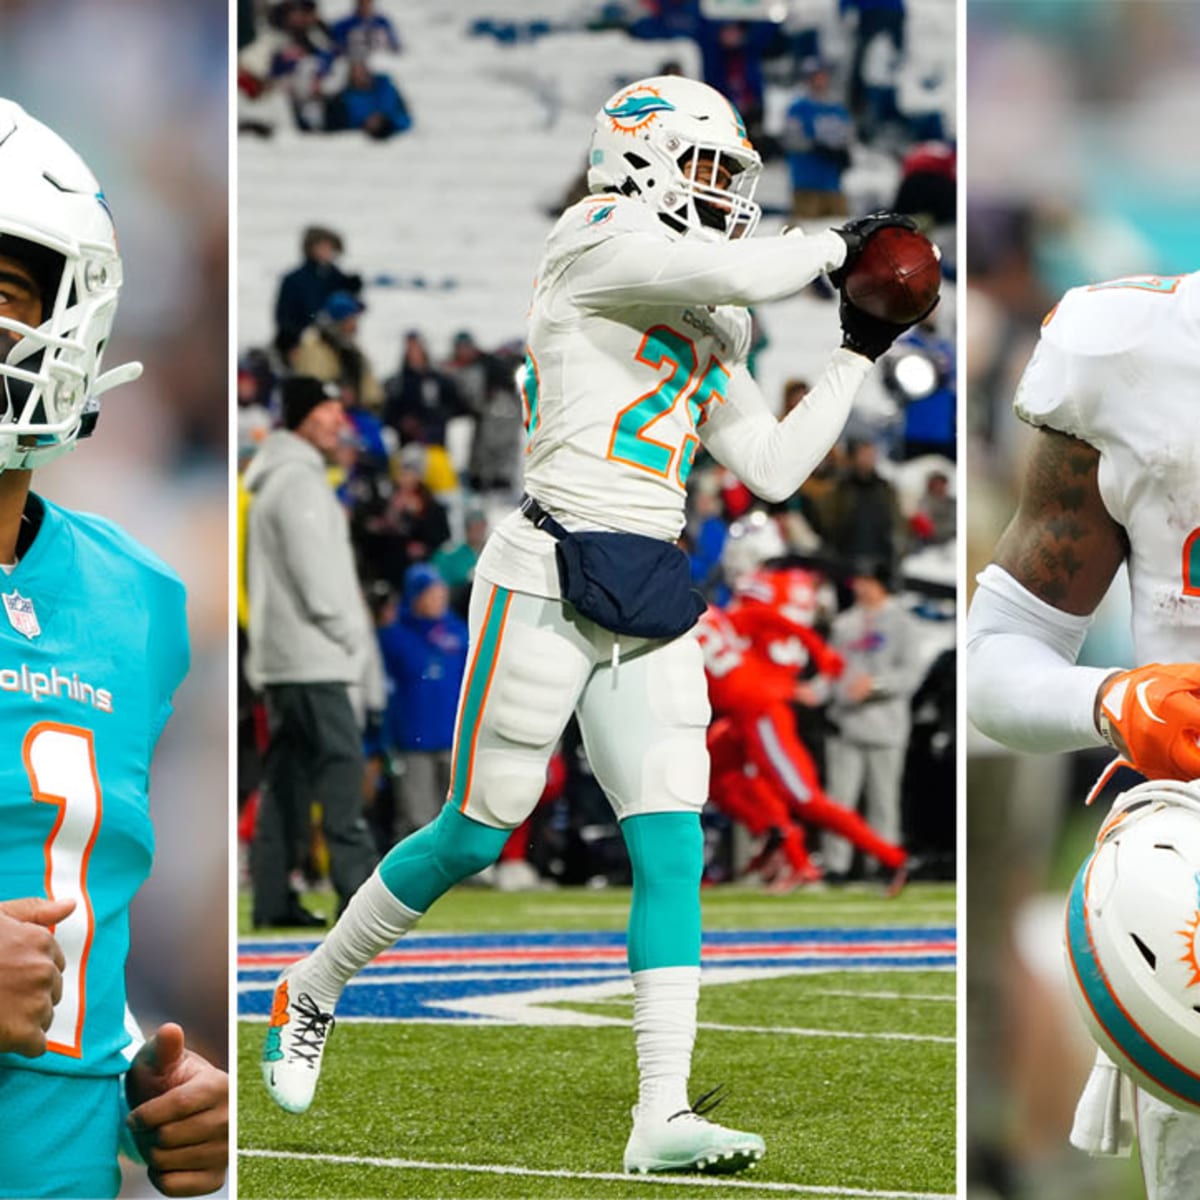 AFC East, Dolphins preview on Jalen Ramsey and defensive backs